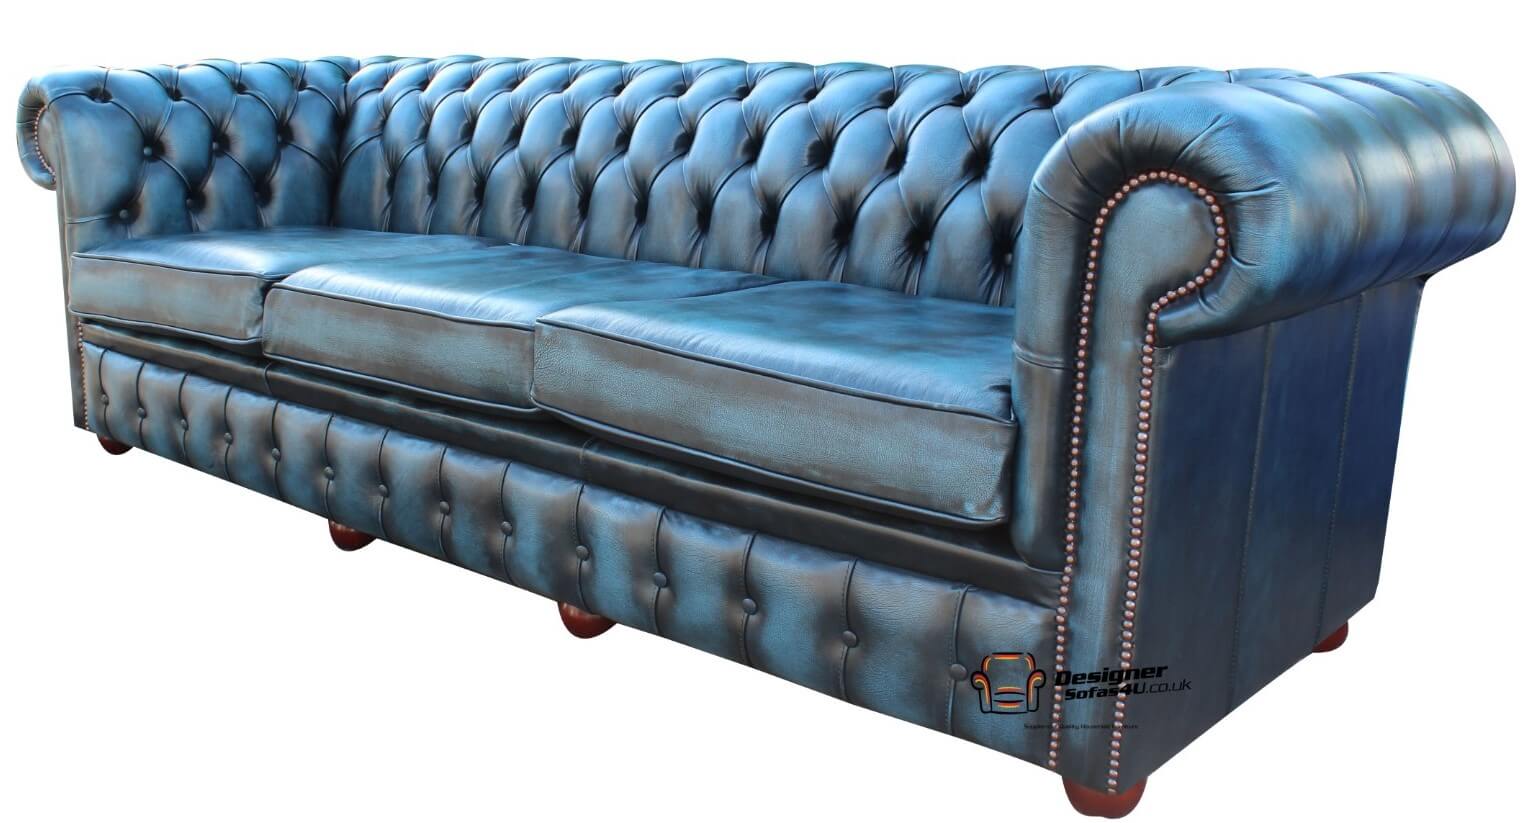 Chesterfield Real Leather 4 Seater Settee Antique Blue Leather Sofa Uk